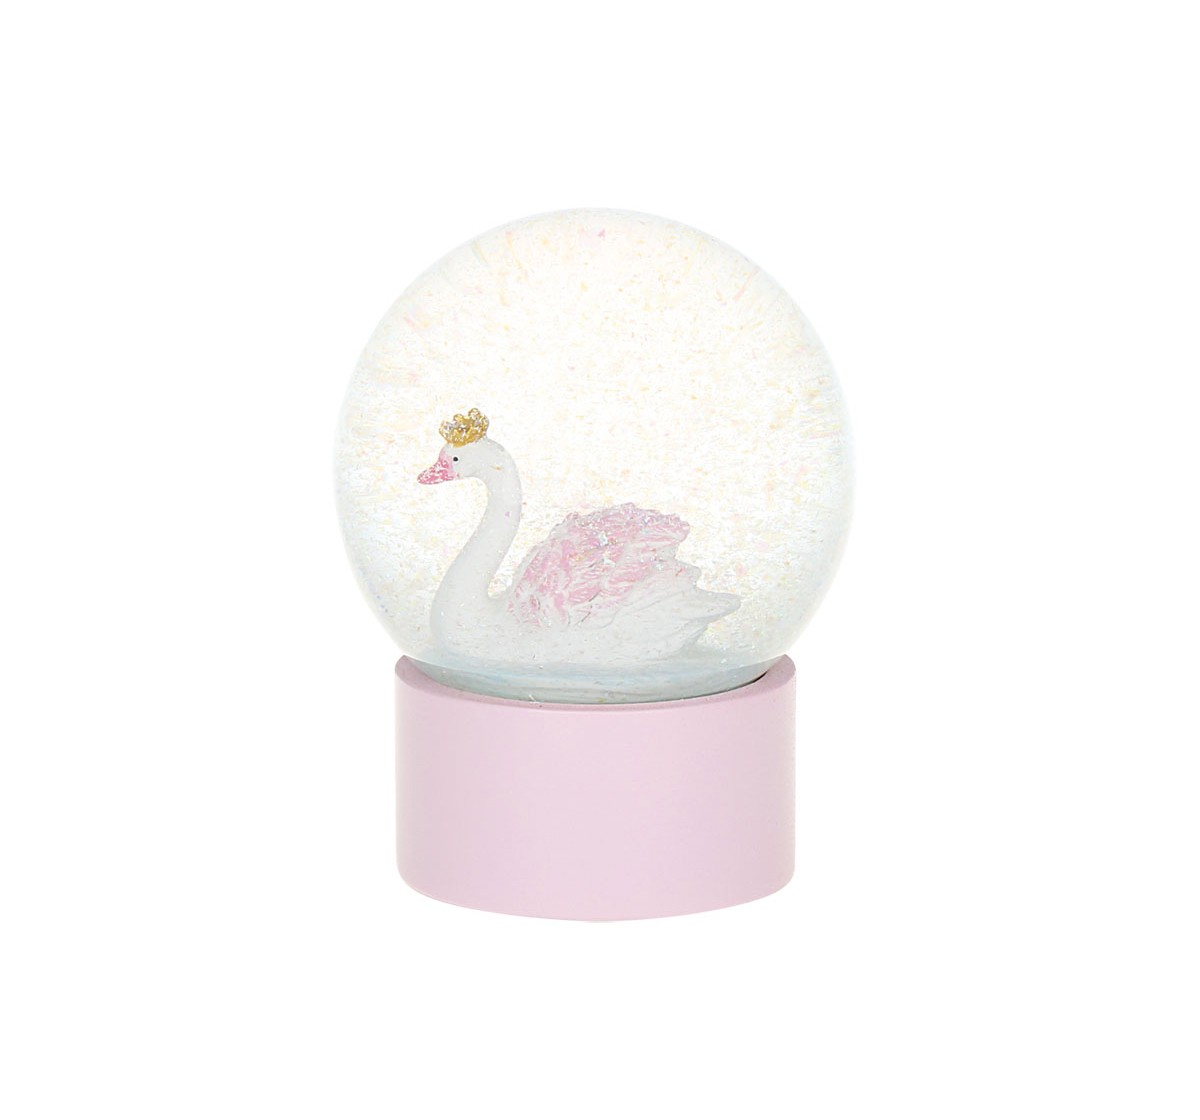 Syloon Tropical - Pink Swan Snow Globe Study & Desk Accessories for Kids age 5Y+ 